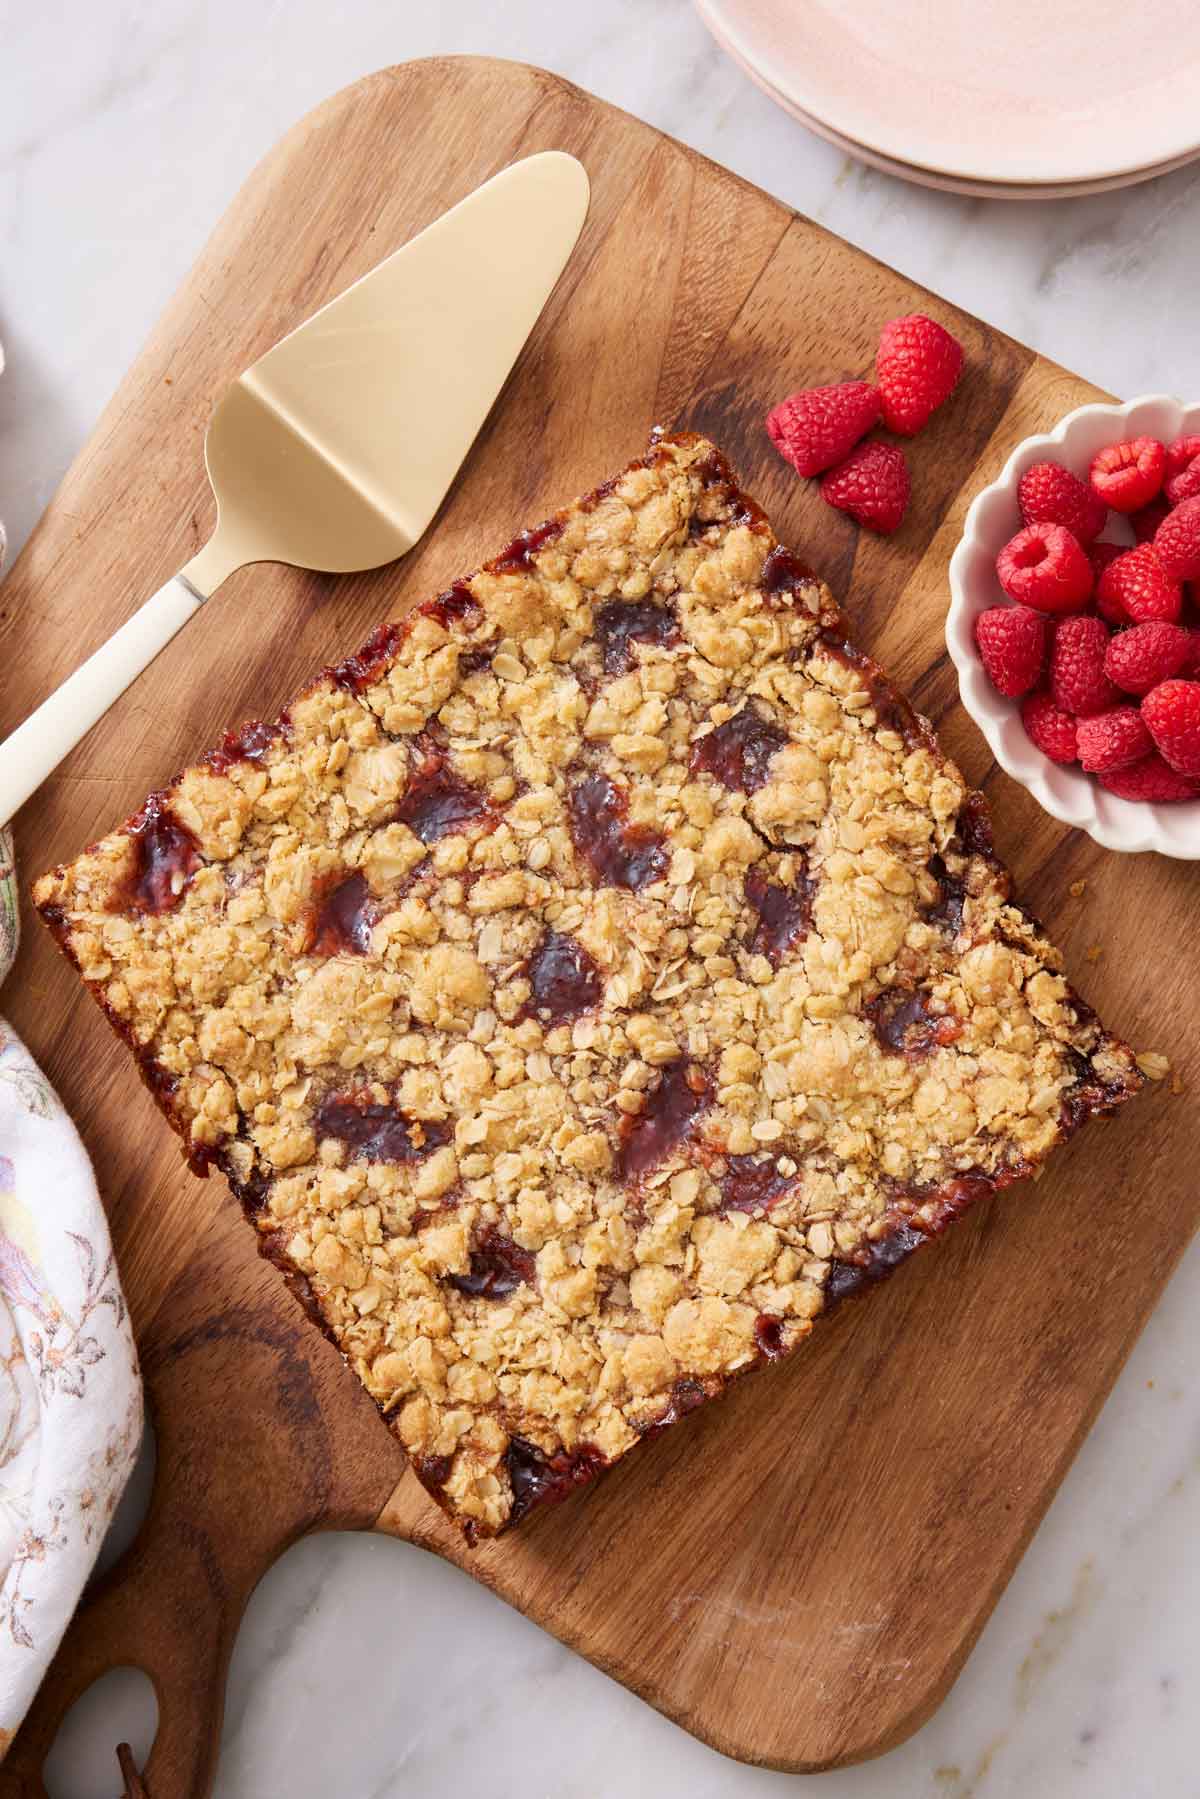 Overhead view of a slab of uncut raspberry bars on a wooden serving board with fresh raspberries on the side.